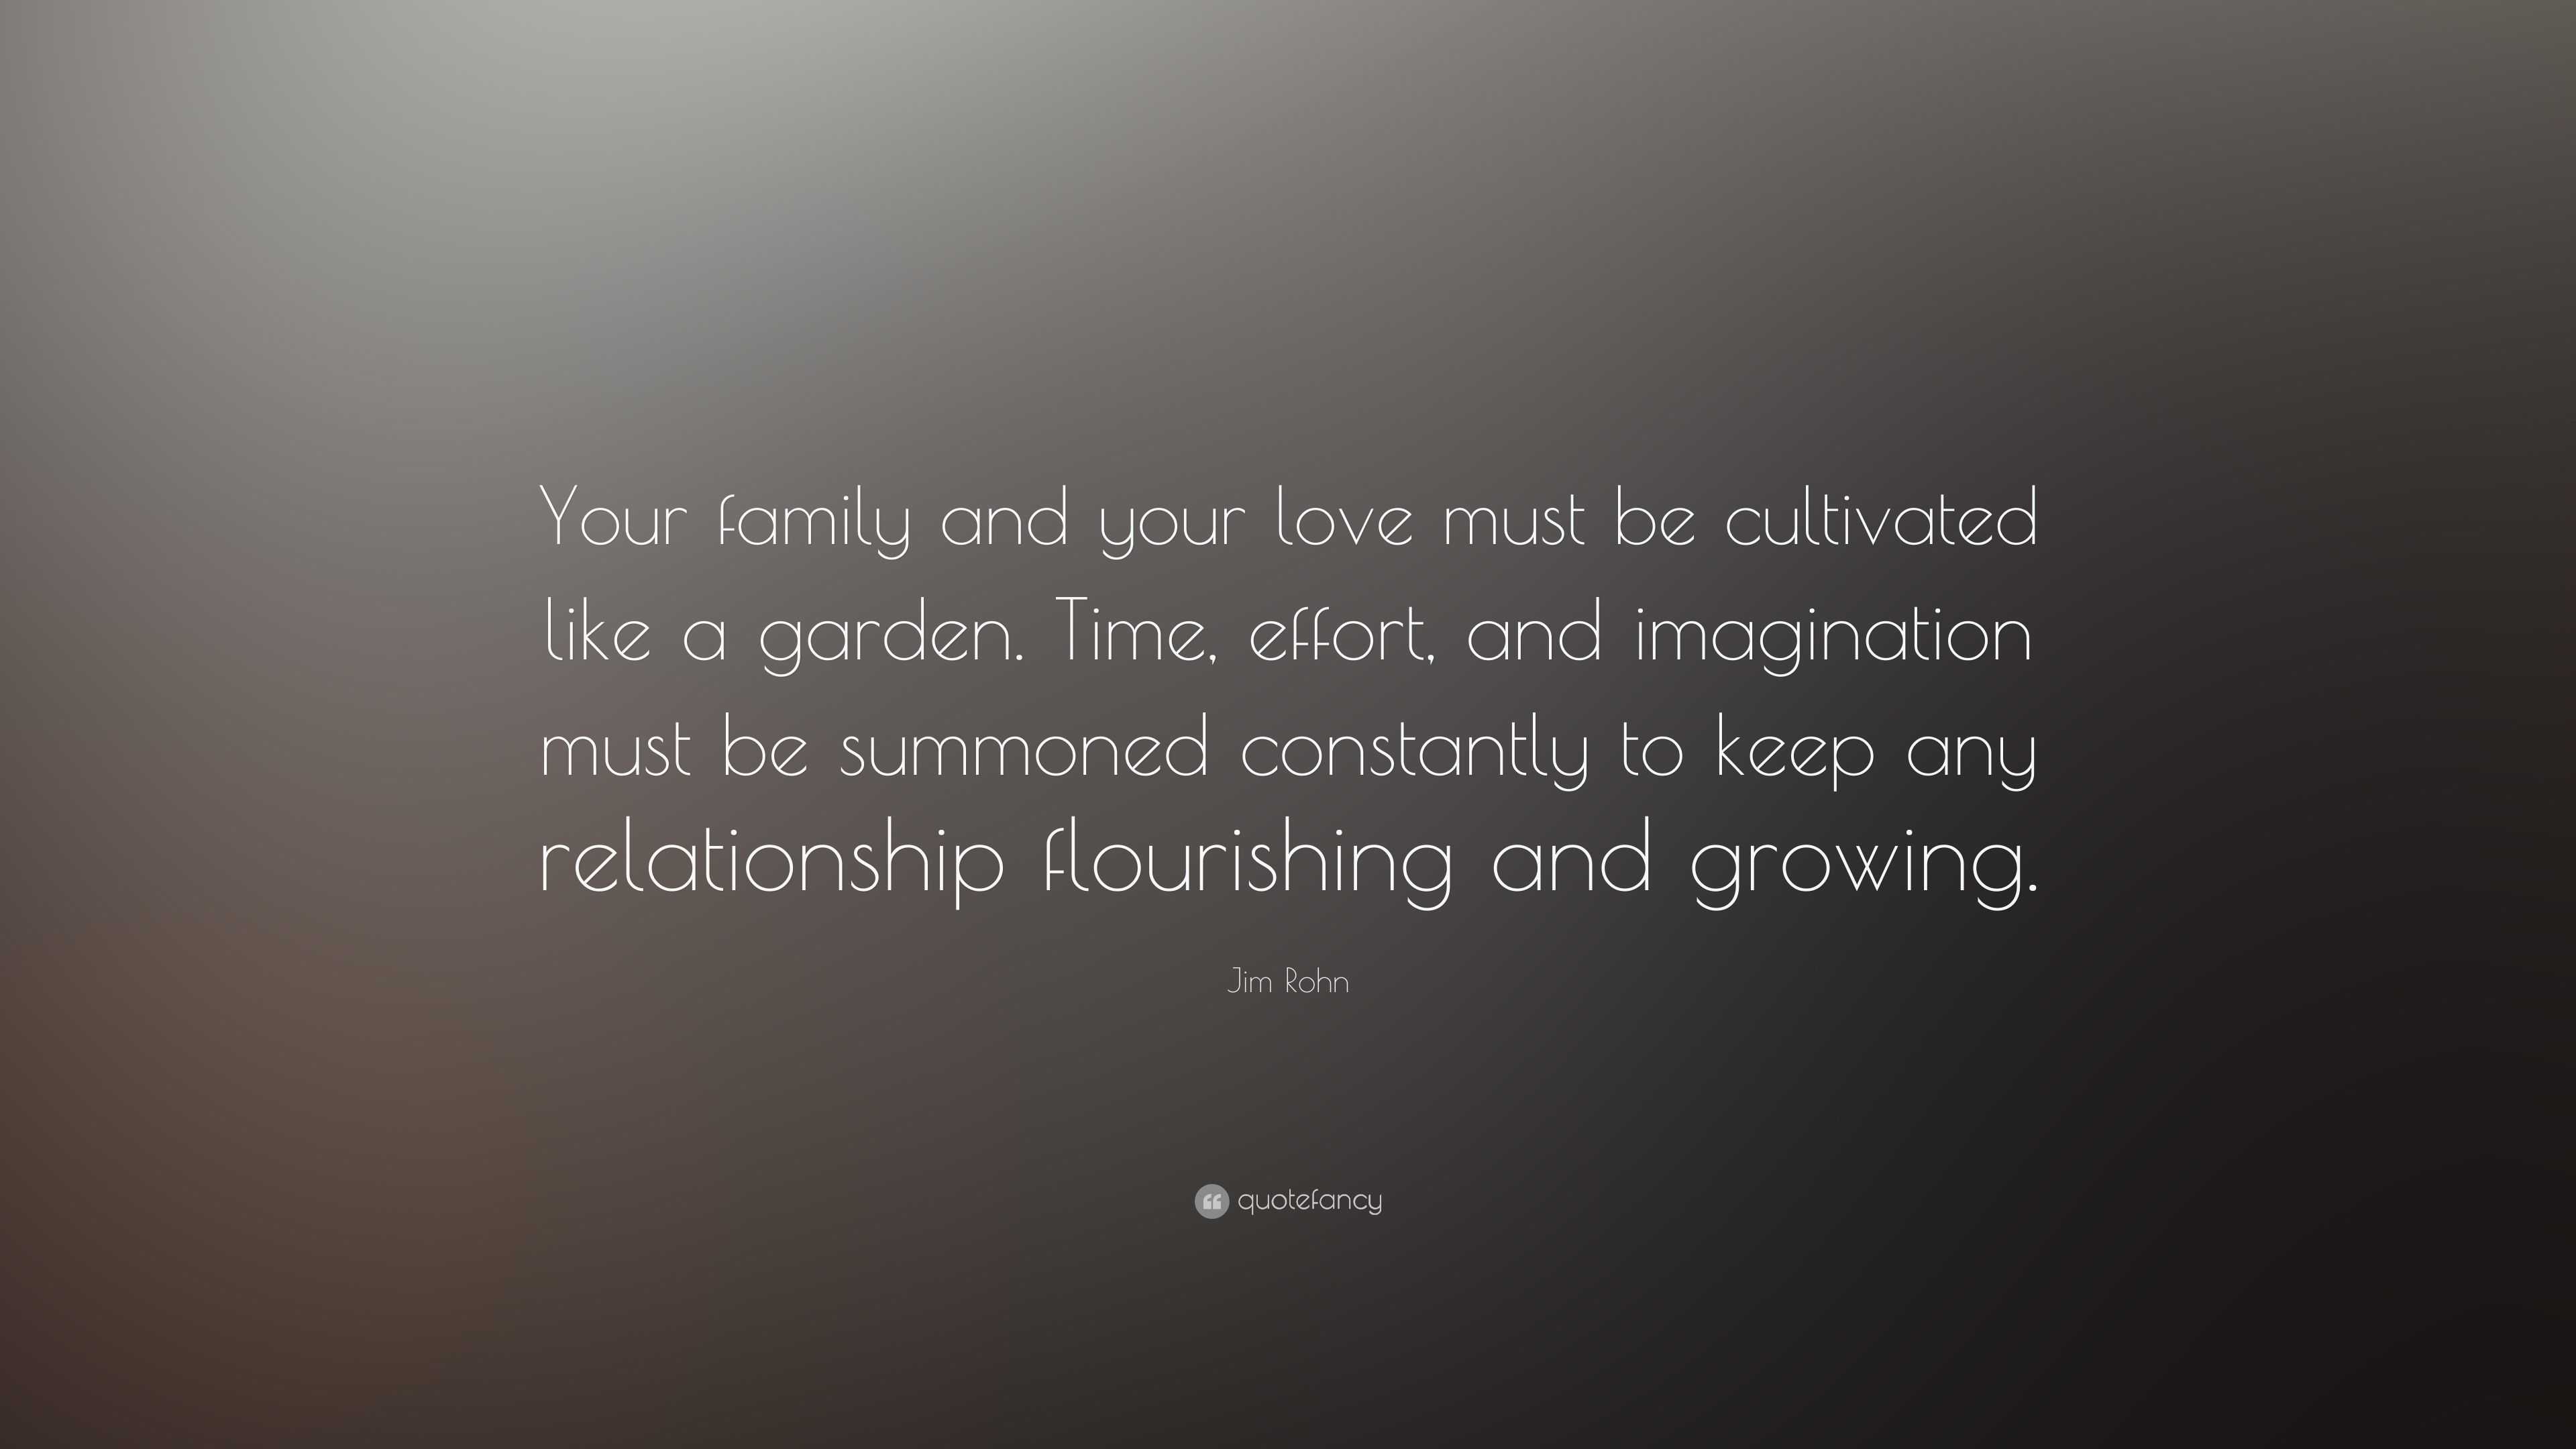 Jim Rohn Quote “Your family and your love must be cultivated like a garden